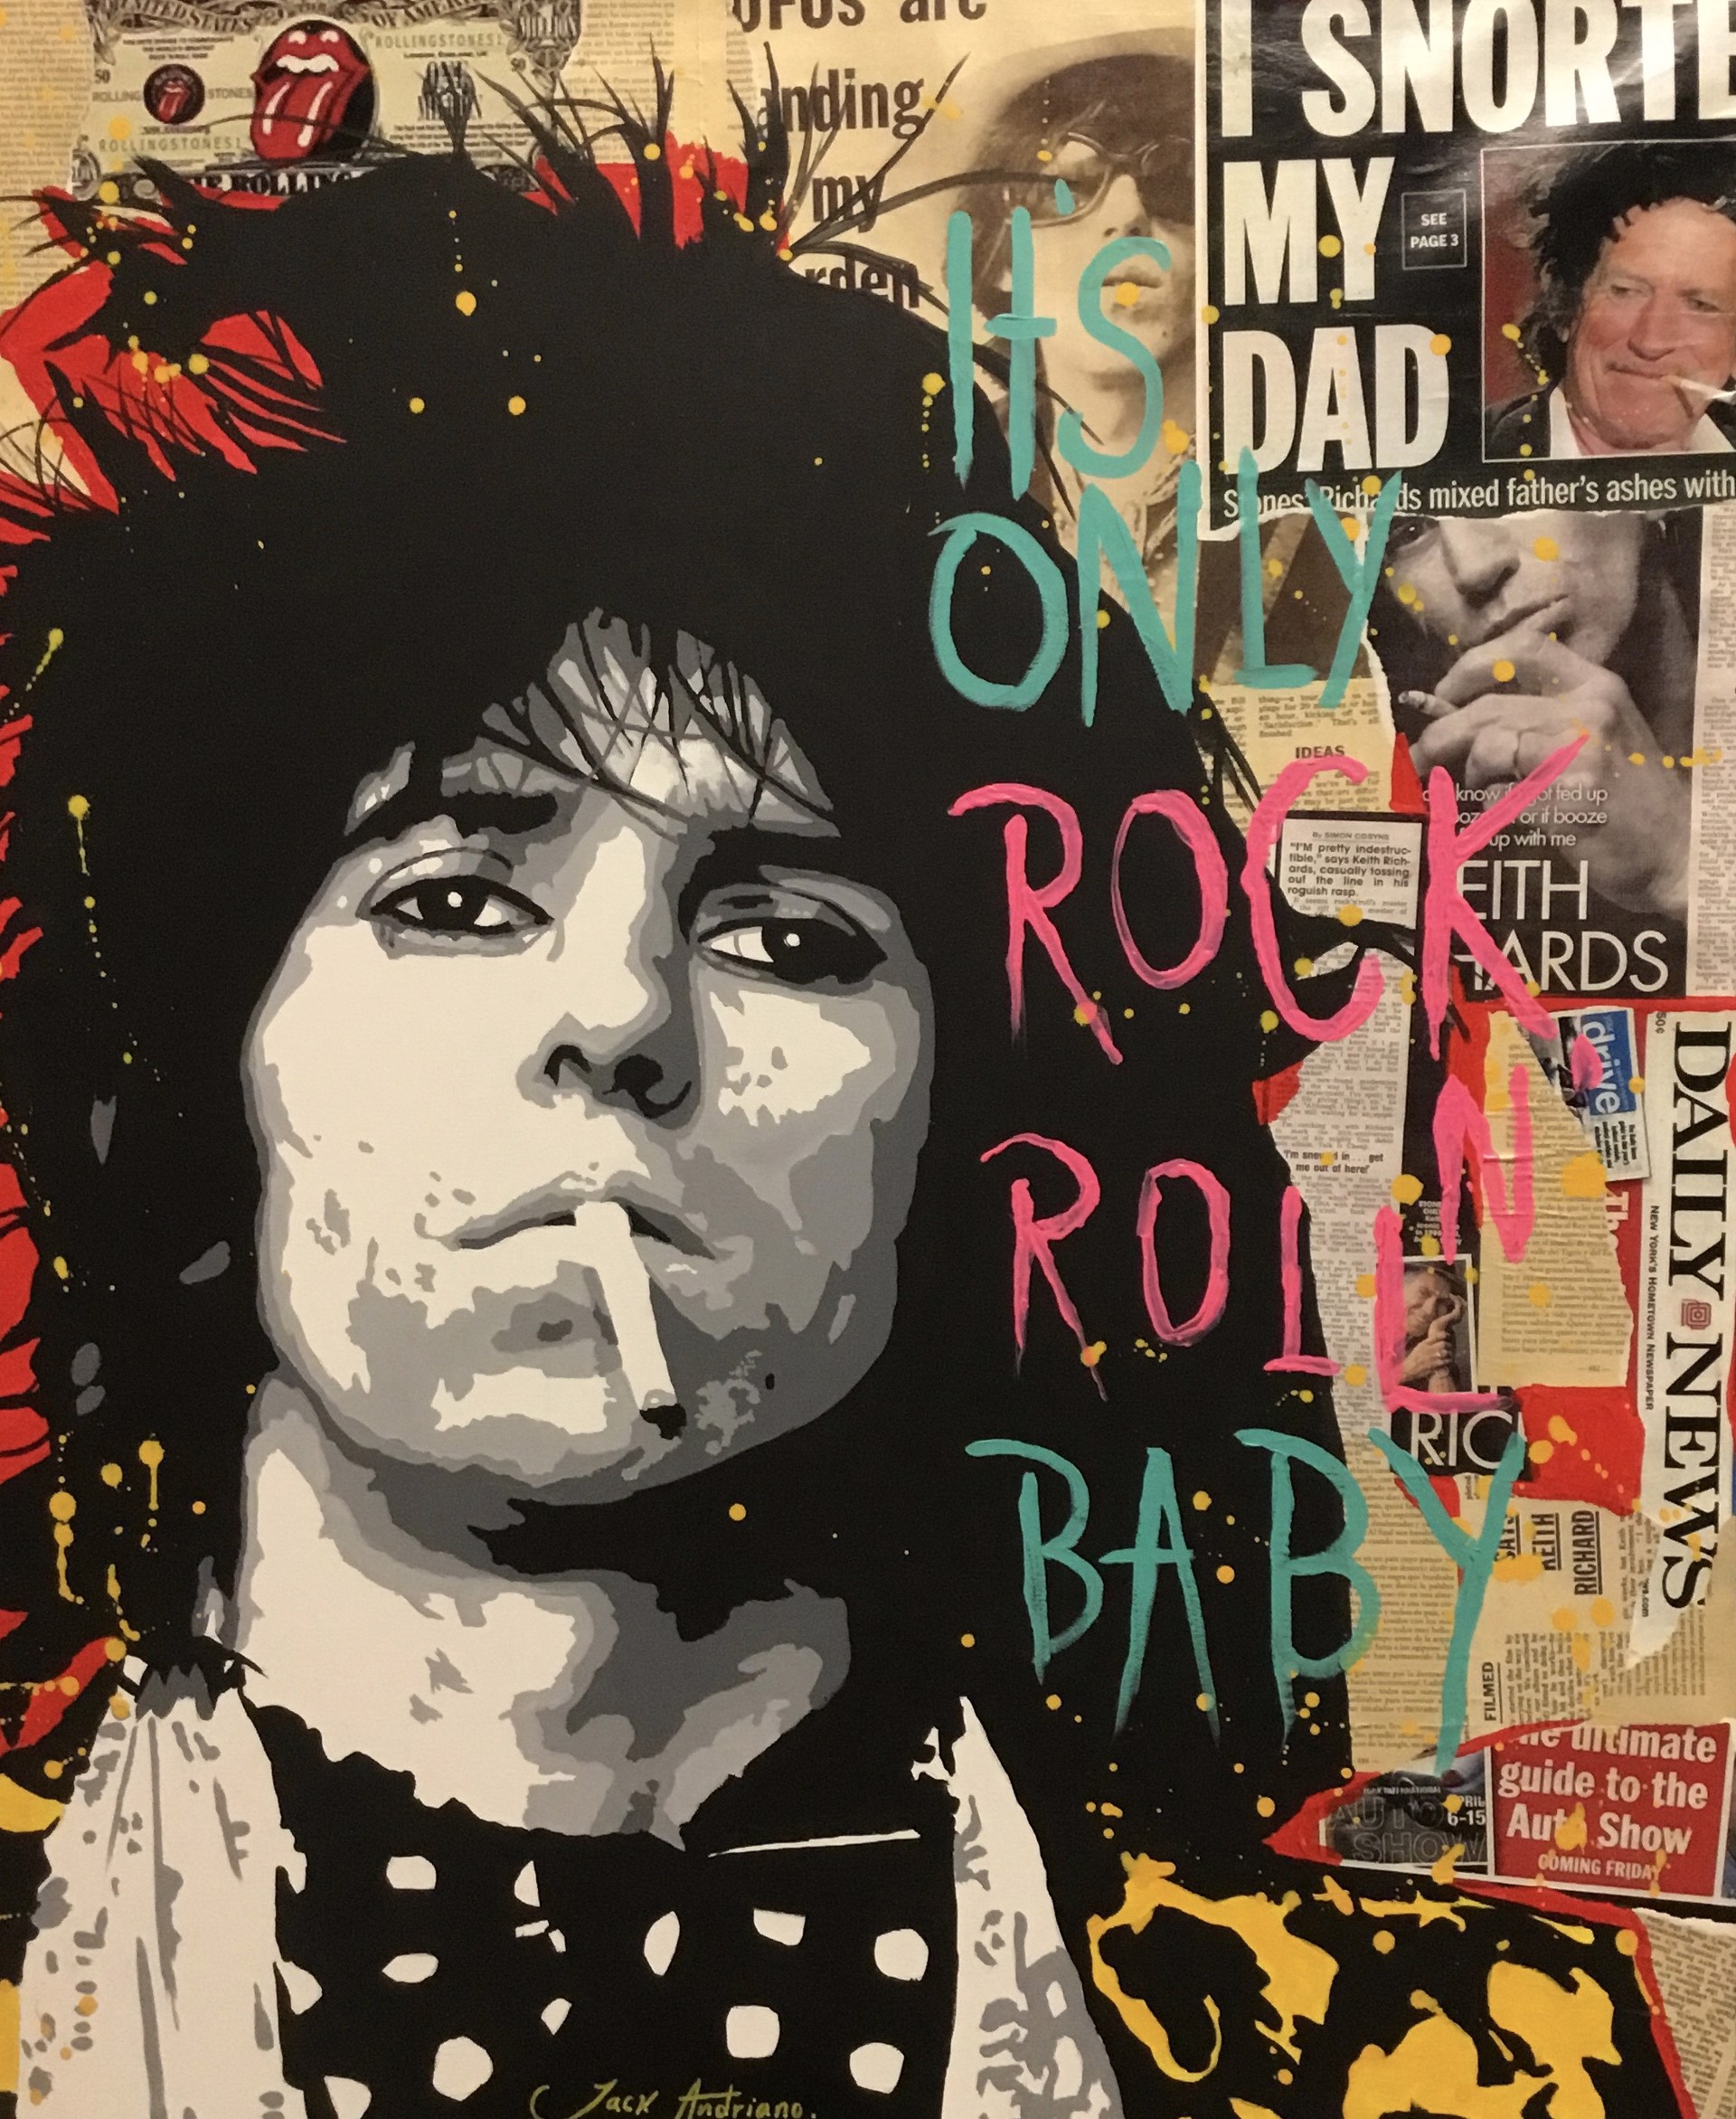 It's Only Rock and Roll Baby (Keith Richards) by Jack Andriano